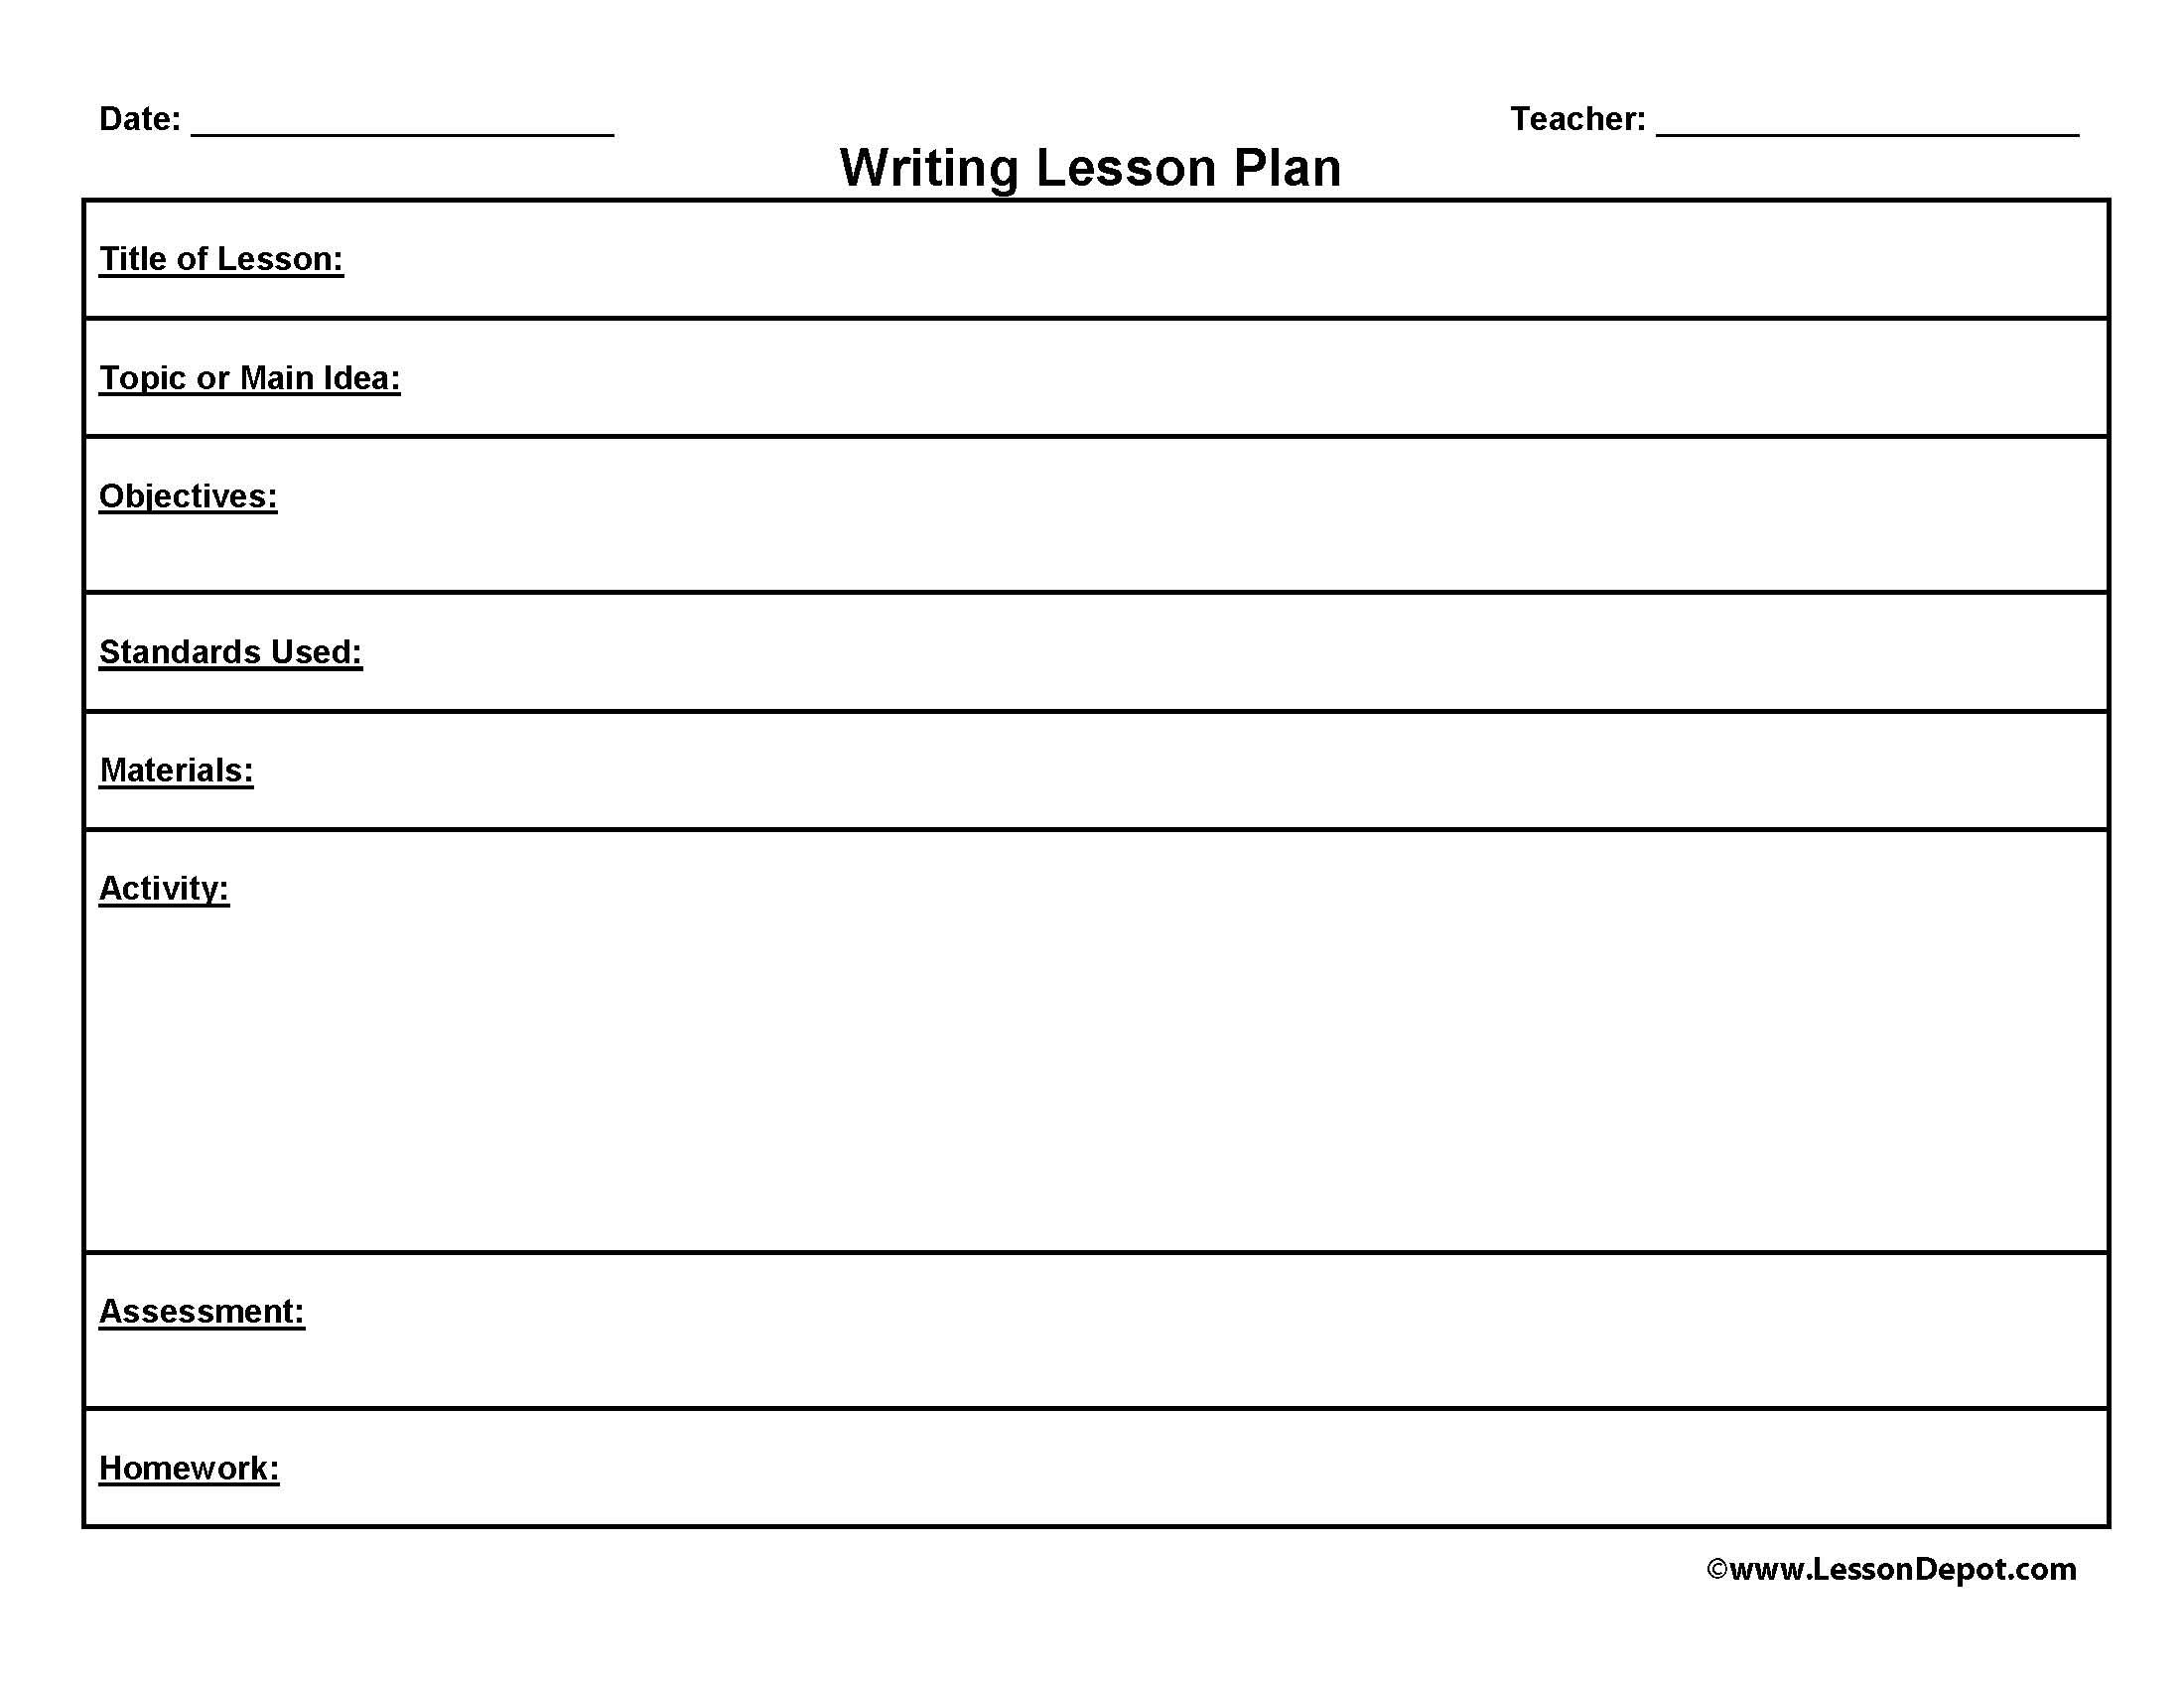 Writing | Writing Lesson Plan Template Writing Lesson Plans